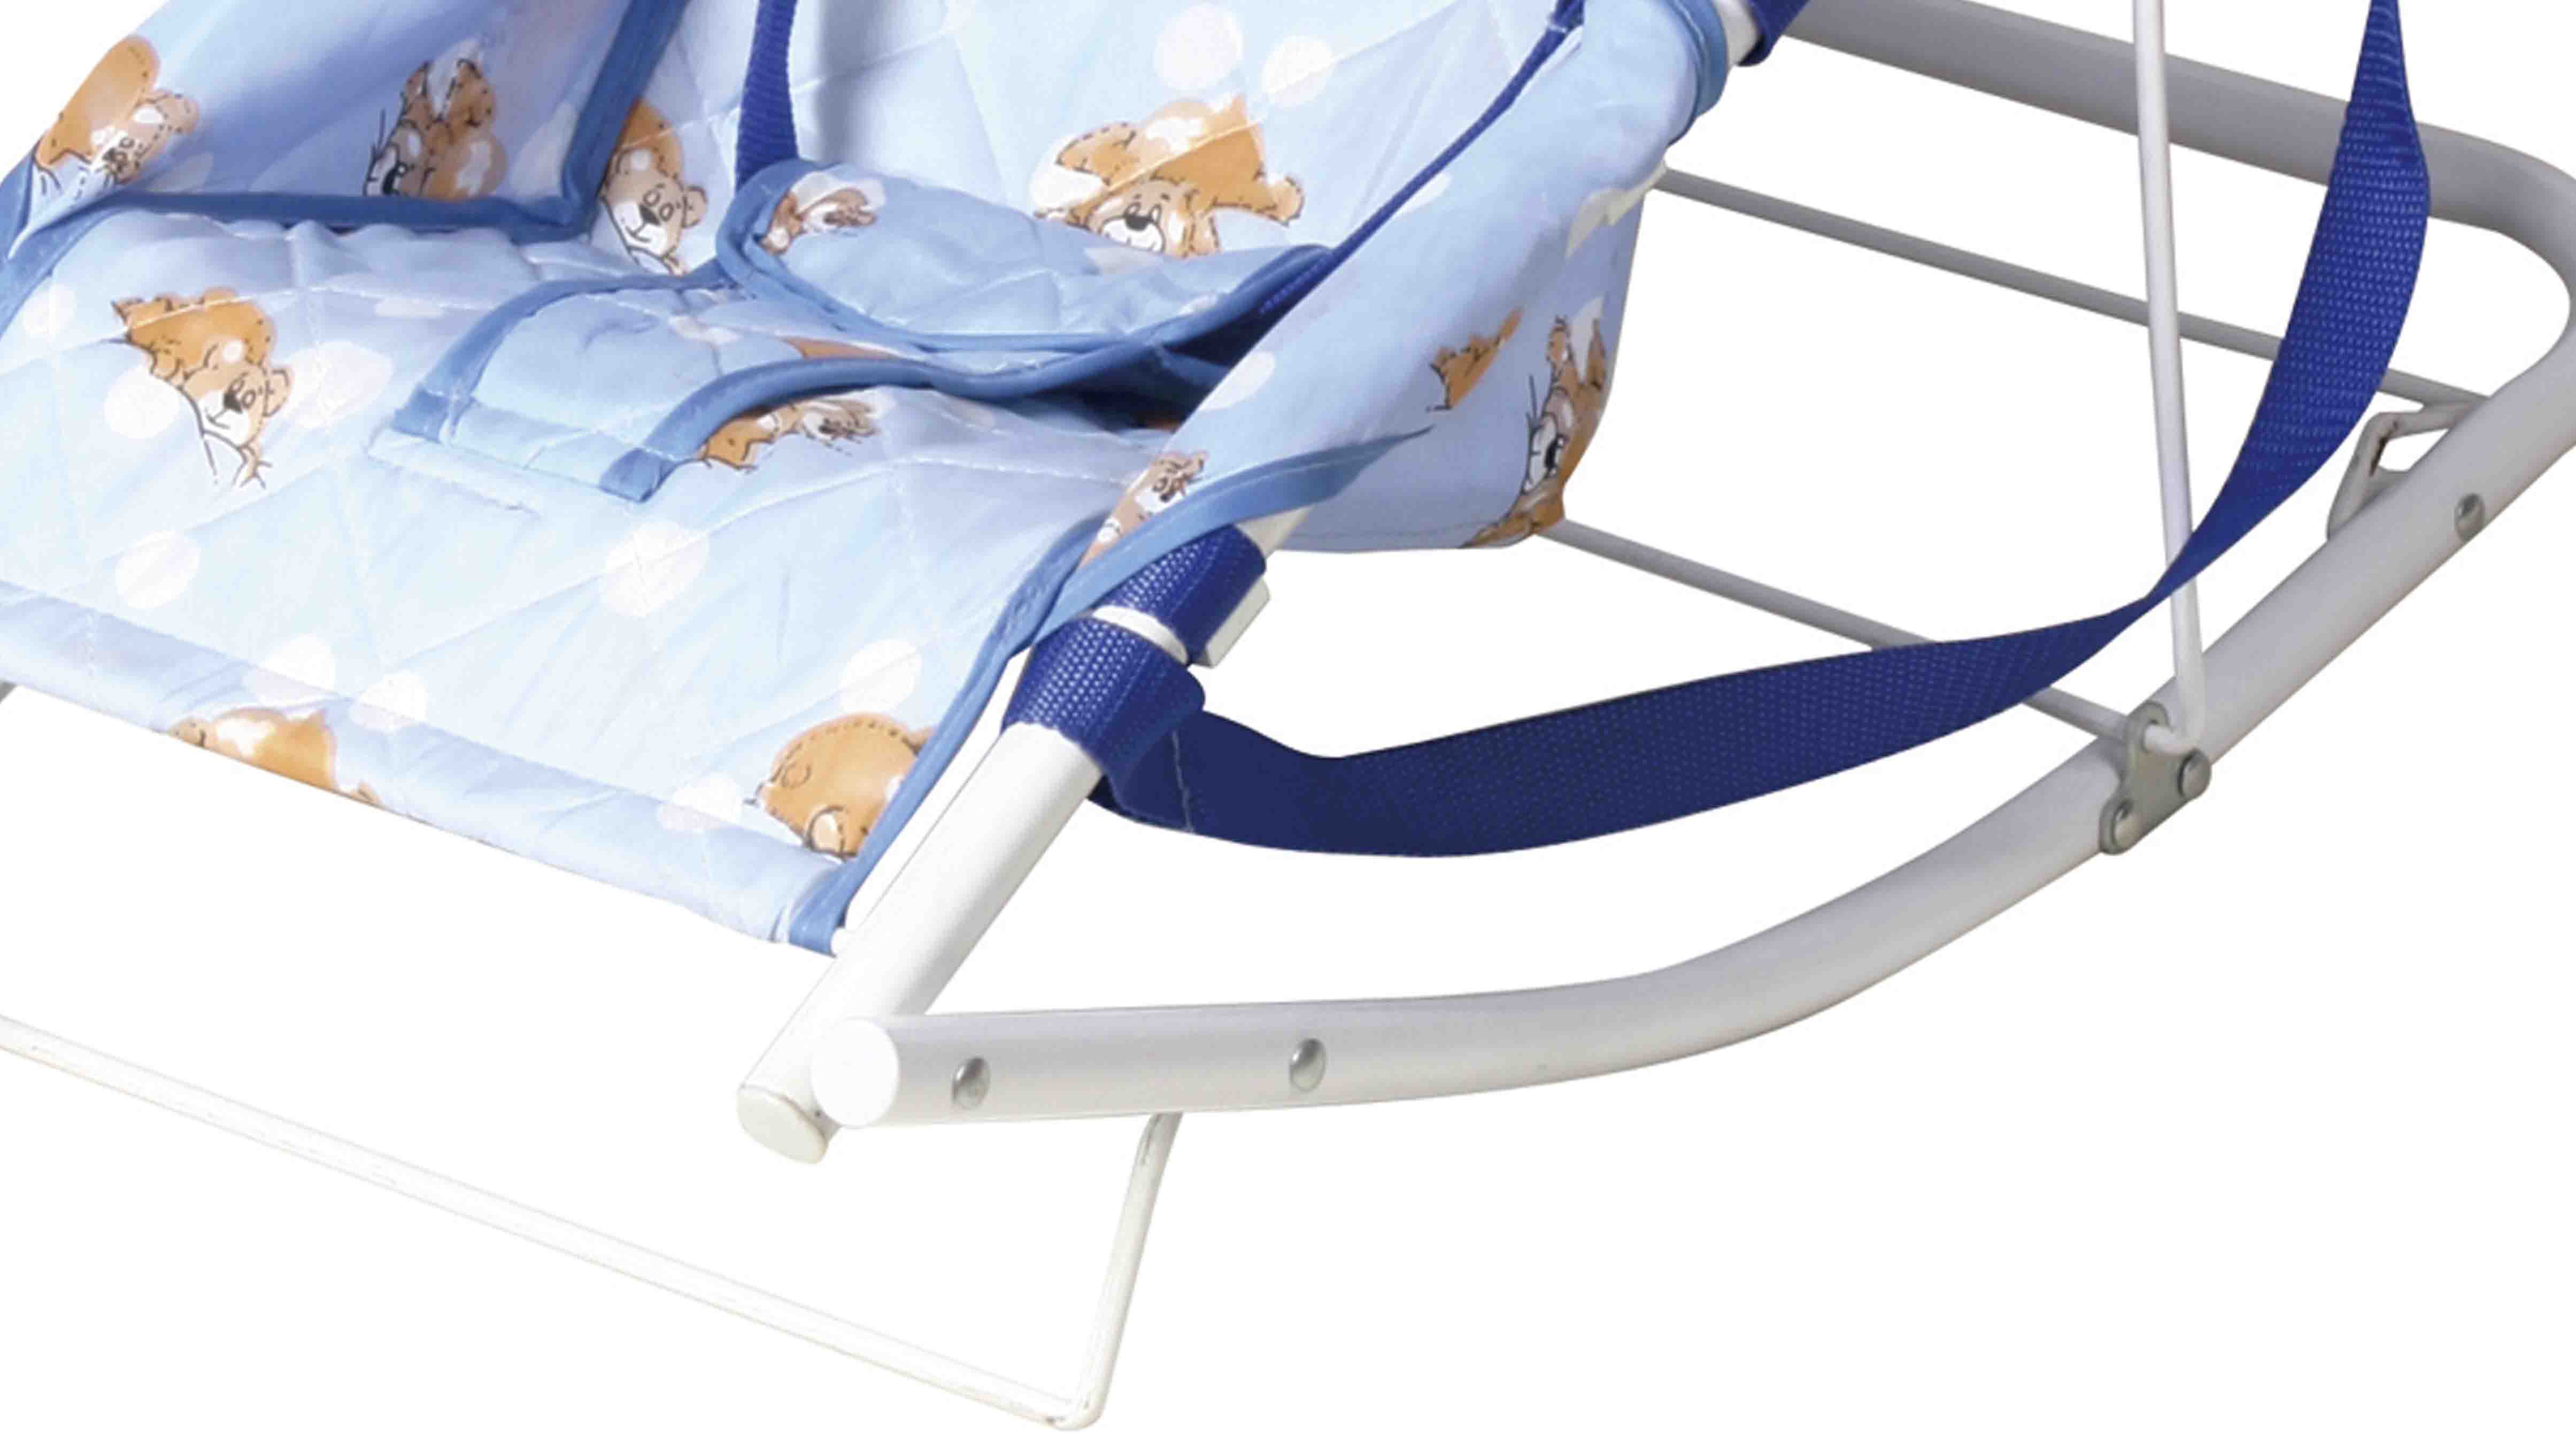 Aoqi comfortable baby rocker price factory price for home